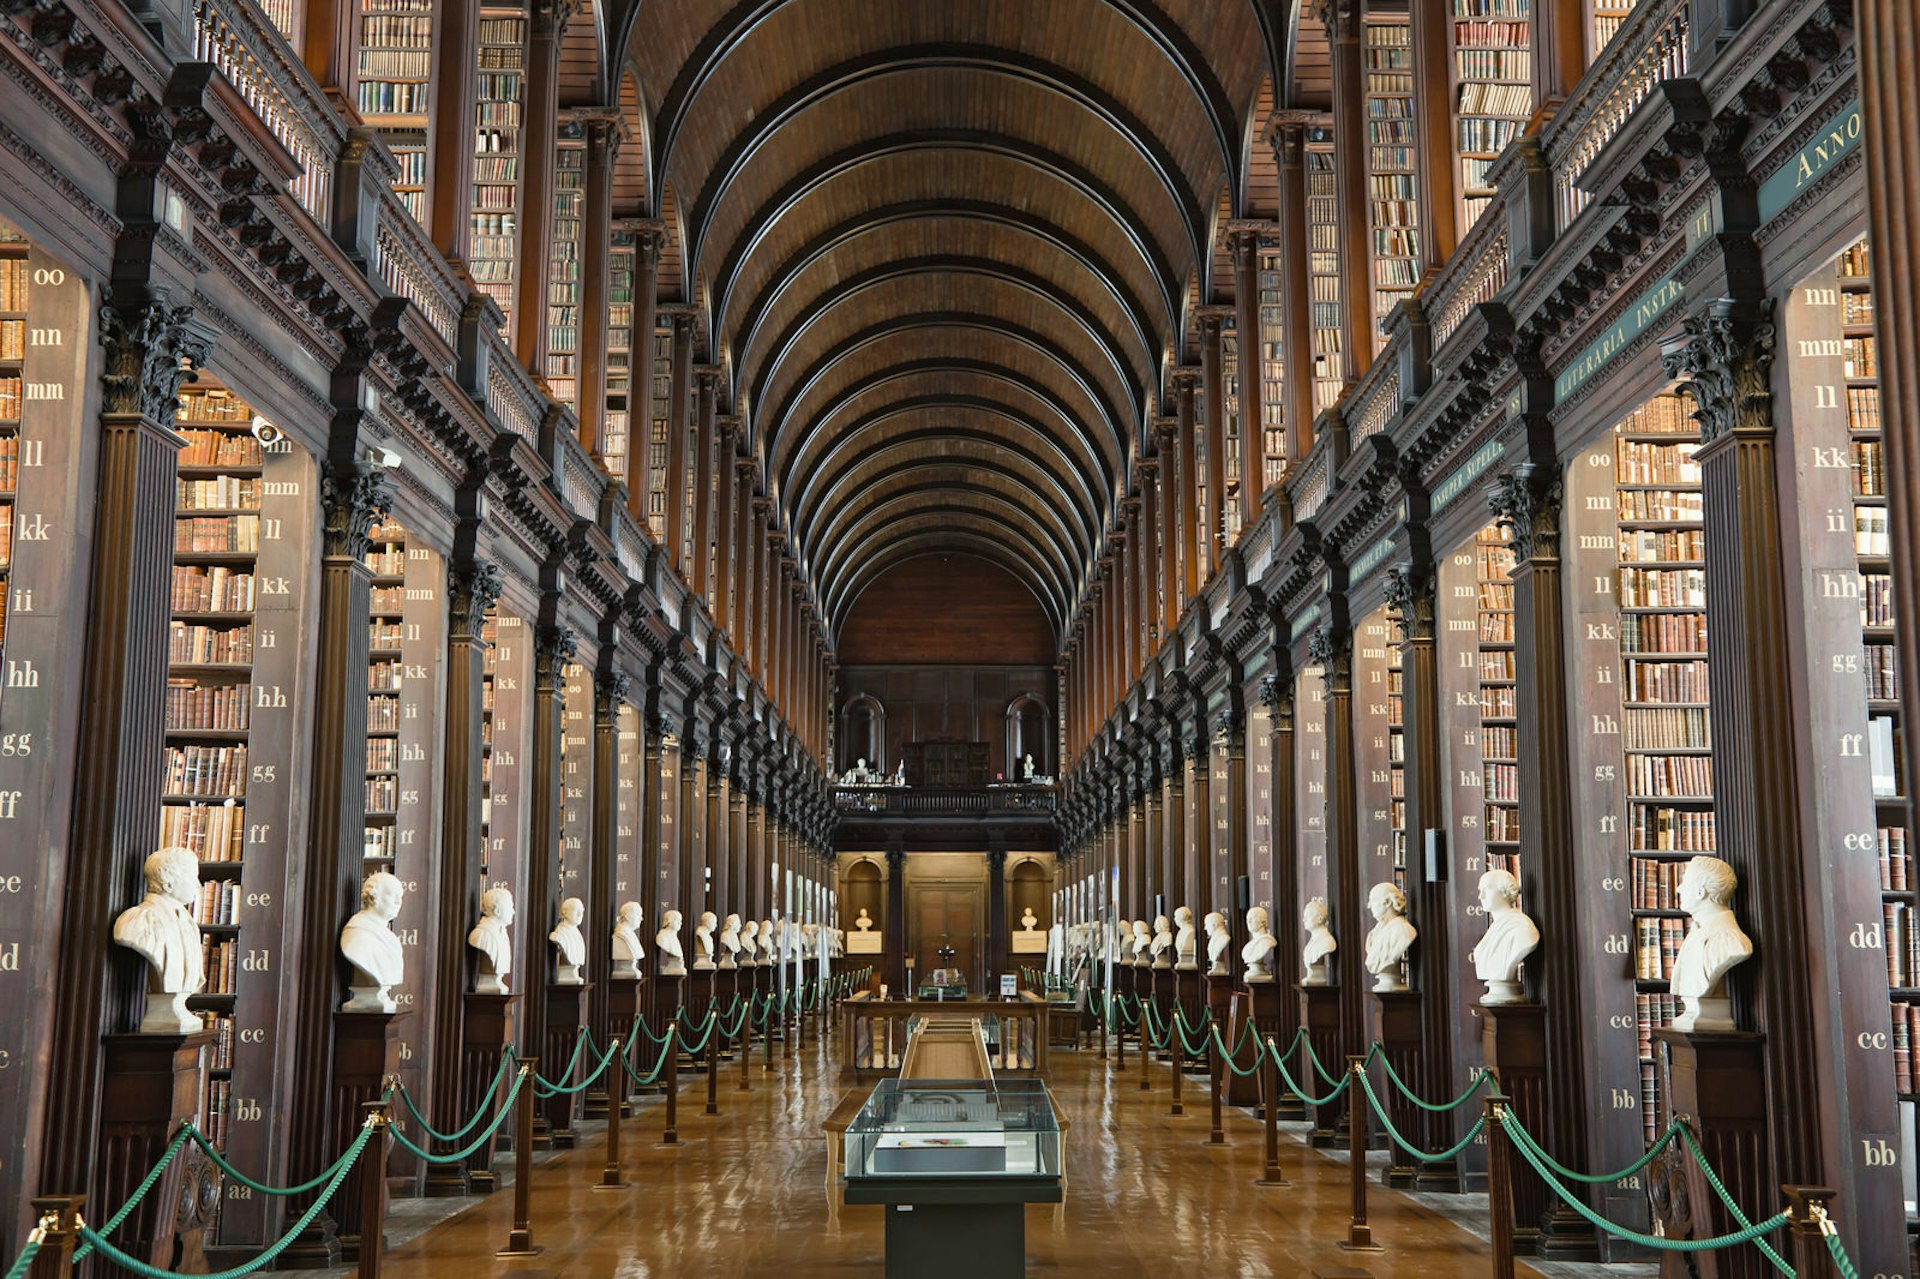 wedding anniversary trip ideas - a wide-angle shot of Trinity College Library, Dublin